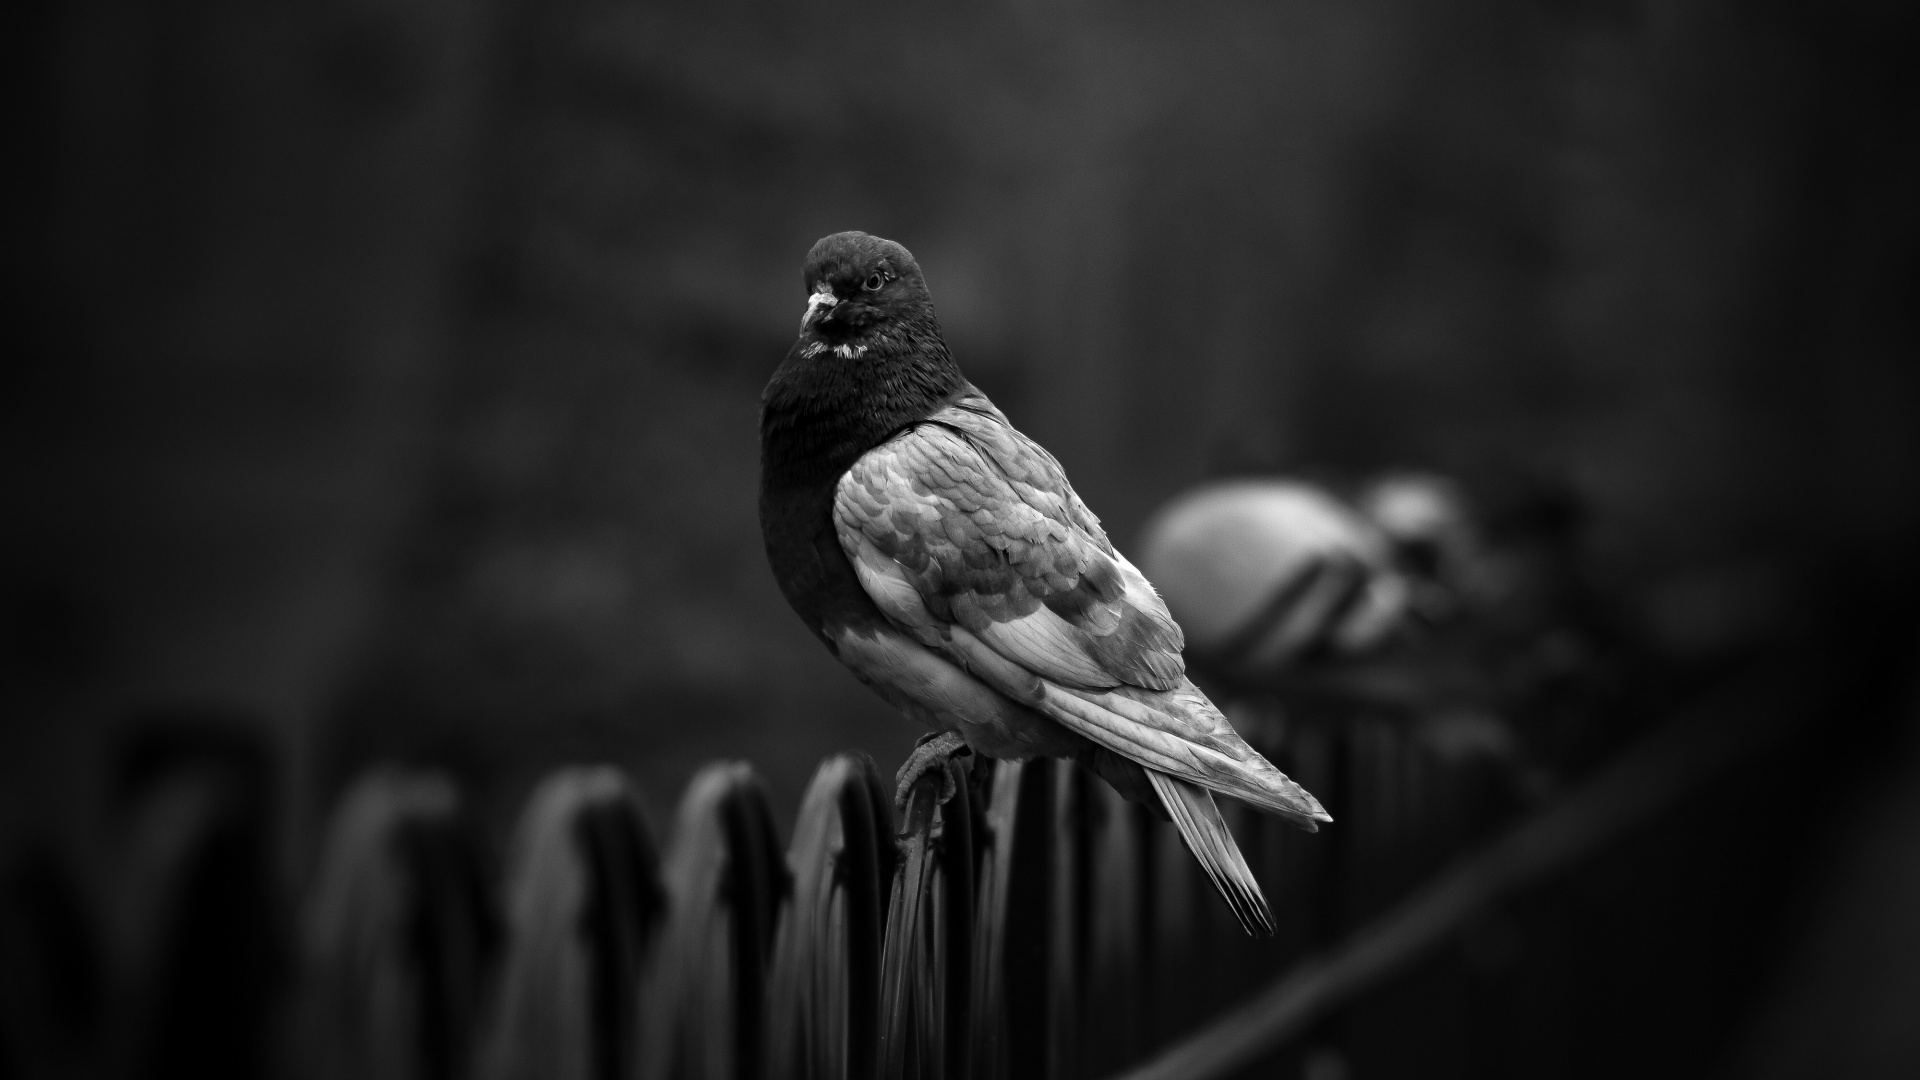 Grayscale Photo of a Bird on a Wooden Fence. Wallpaper in 1920x1080 Resolution